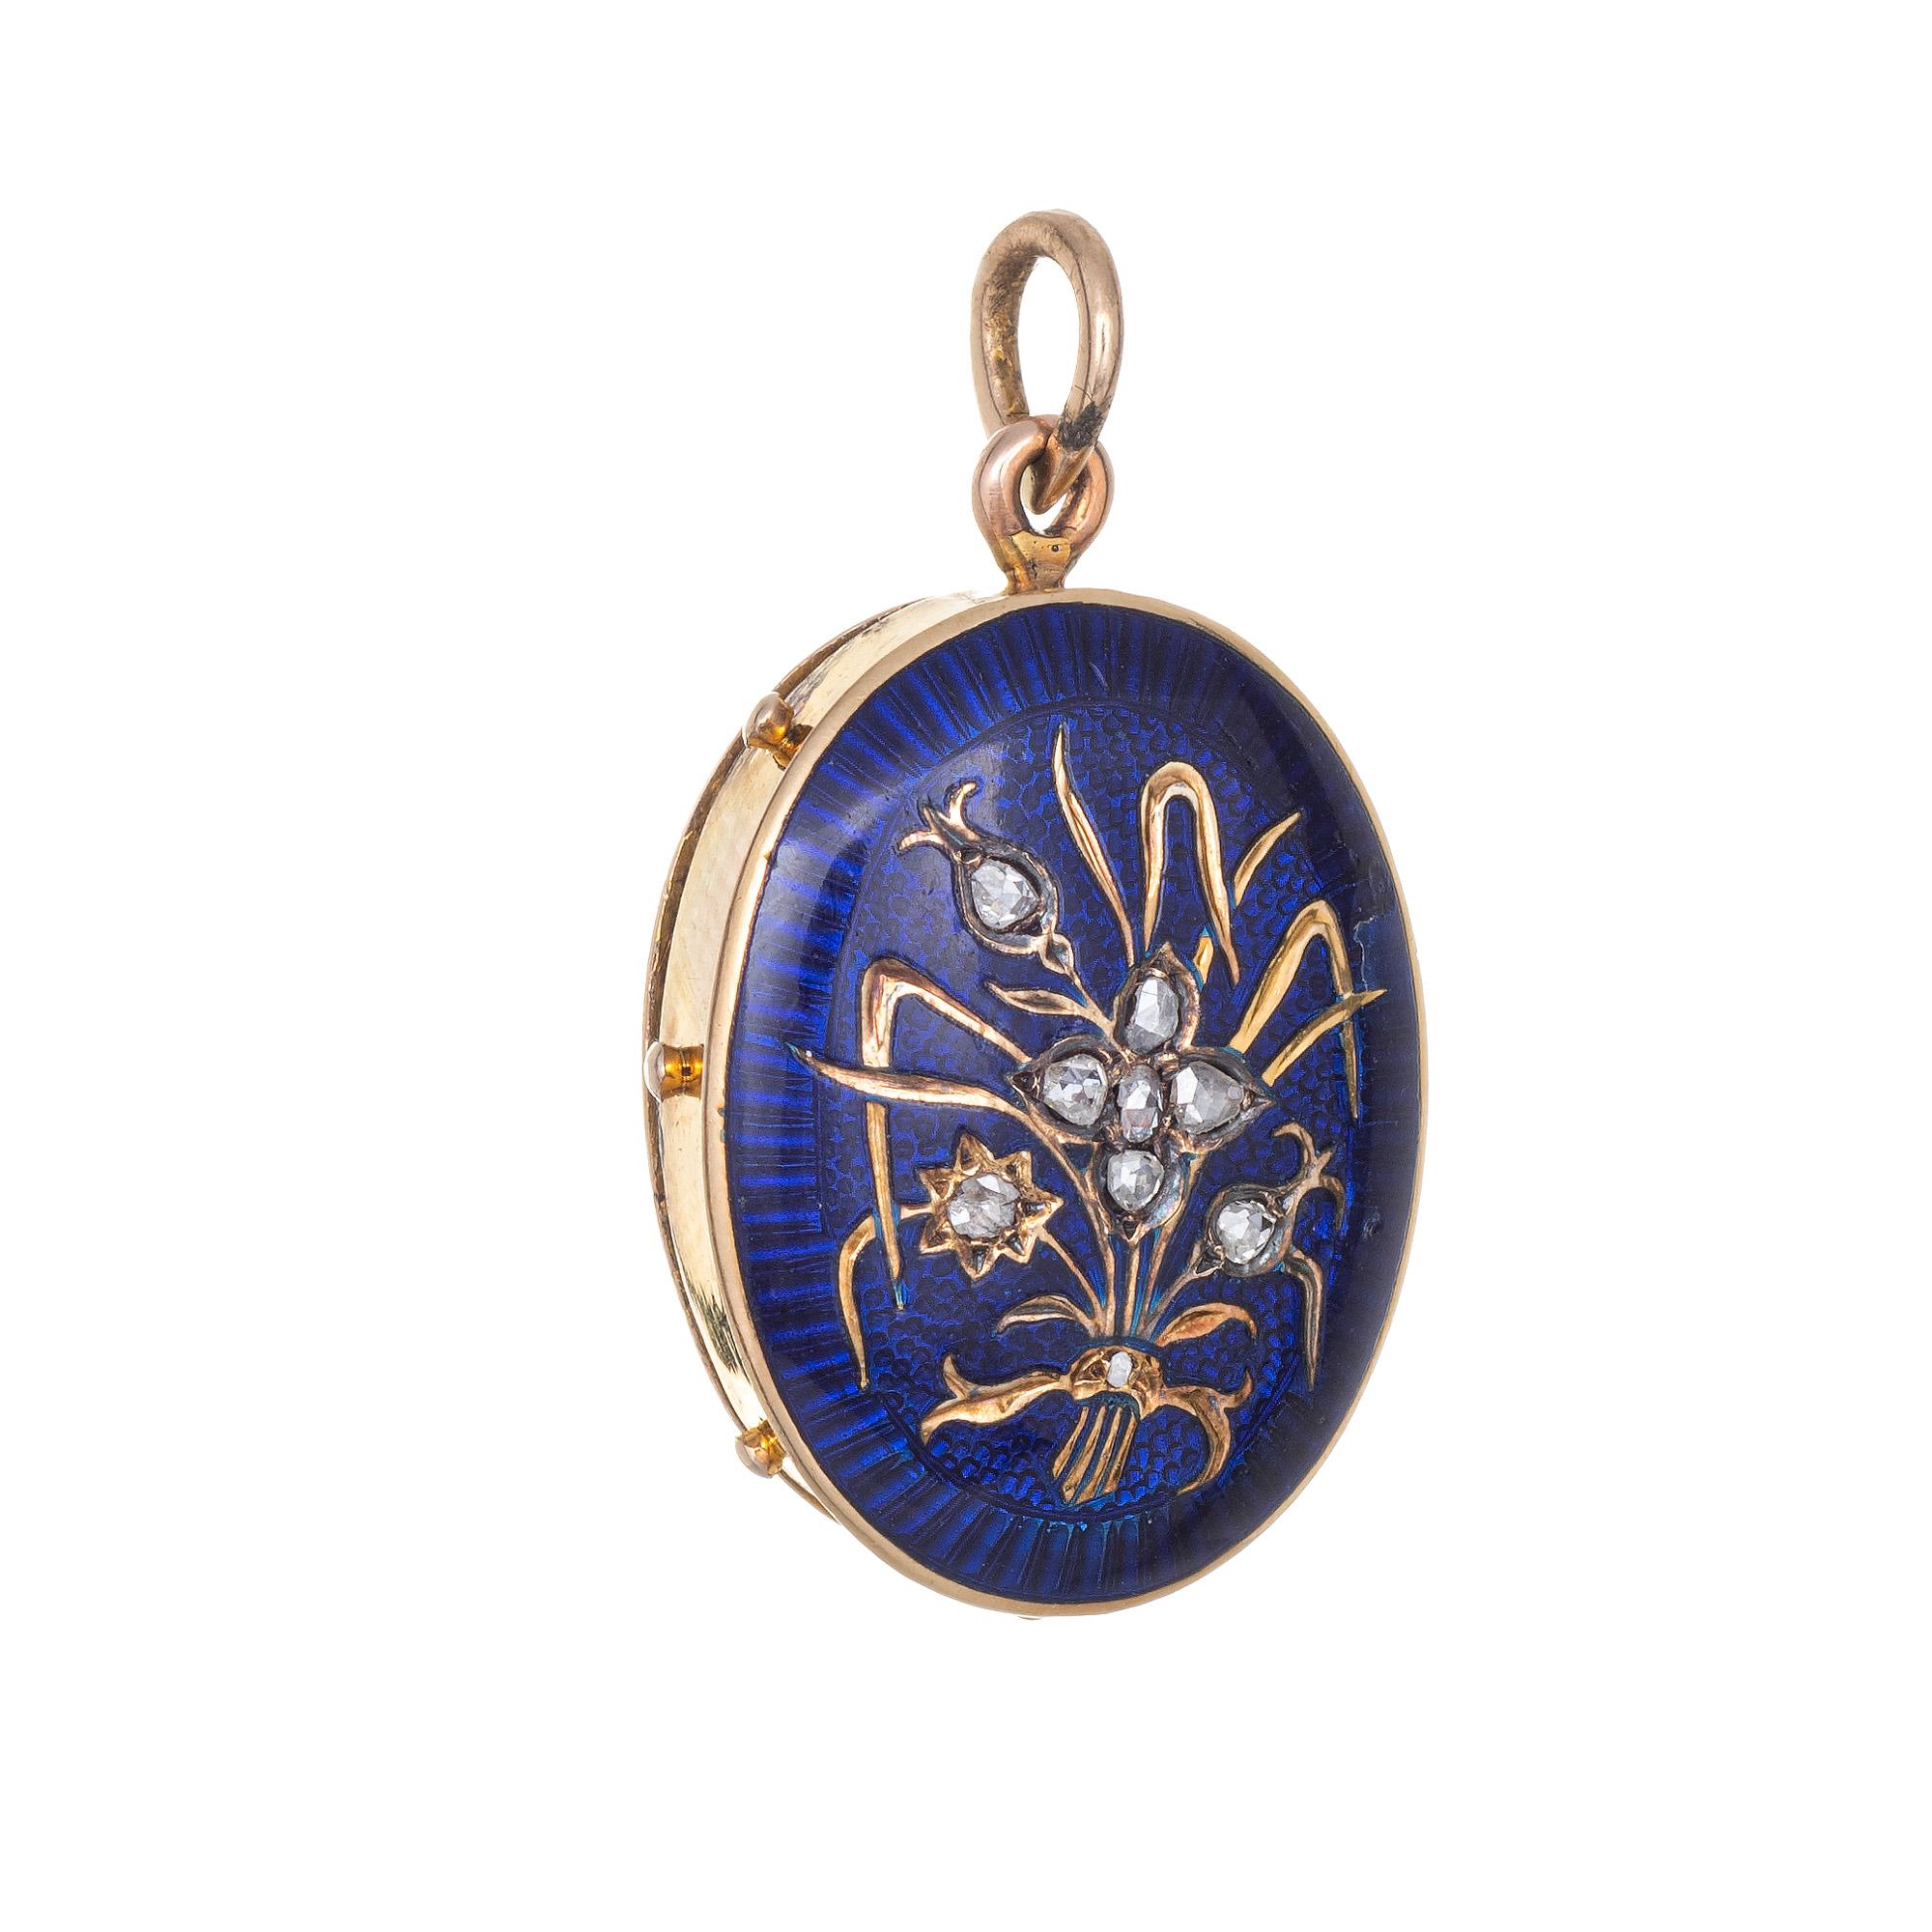 Finely detailed antique Victorian diamond & enamel locket/pendant (circa 1880s to 1900s) crafted in 14 karat yellow gold. 

Rose cut diamonds total an estimated 0.18 carats (estimated at J-K color and I1 clarity).  

The blue enamel locket features